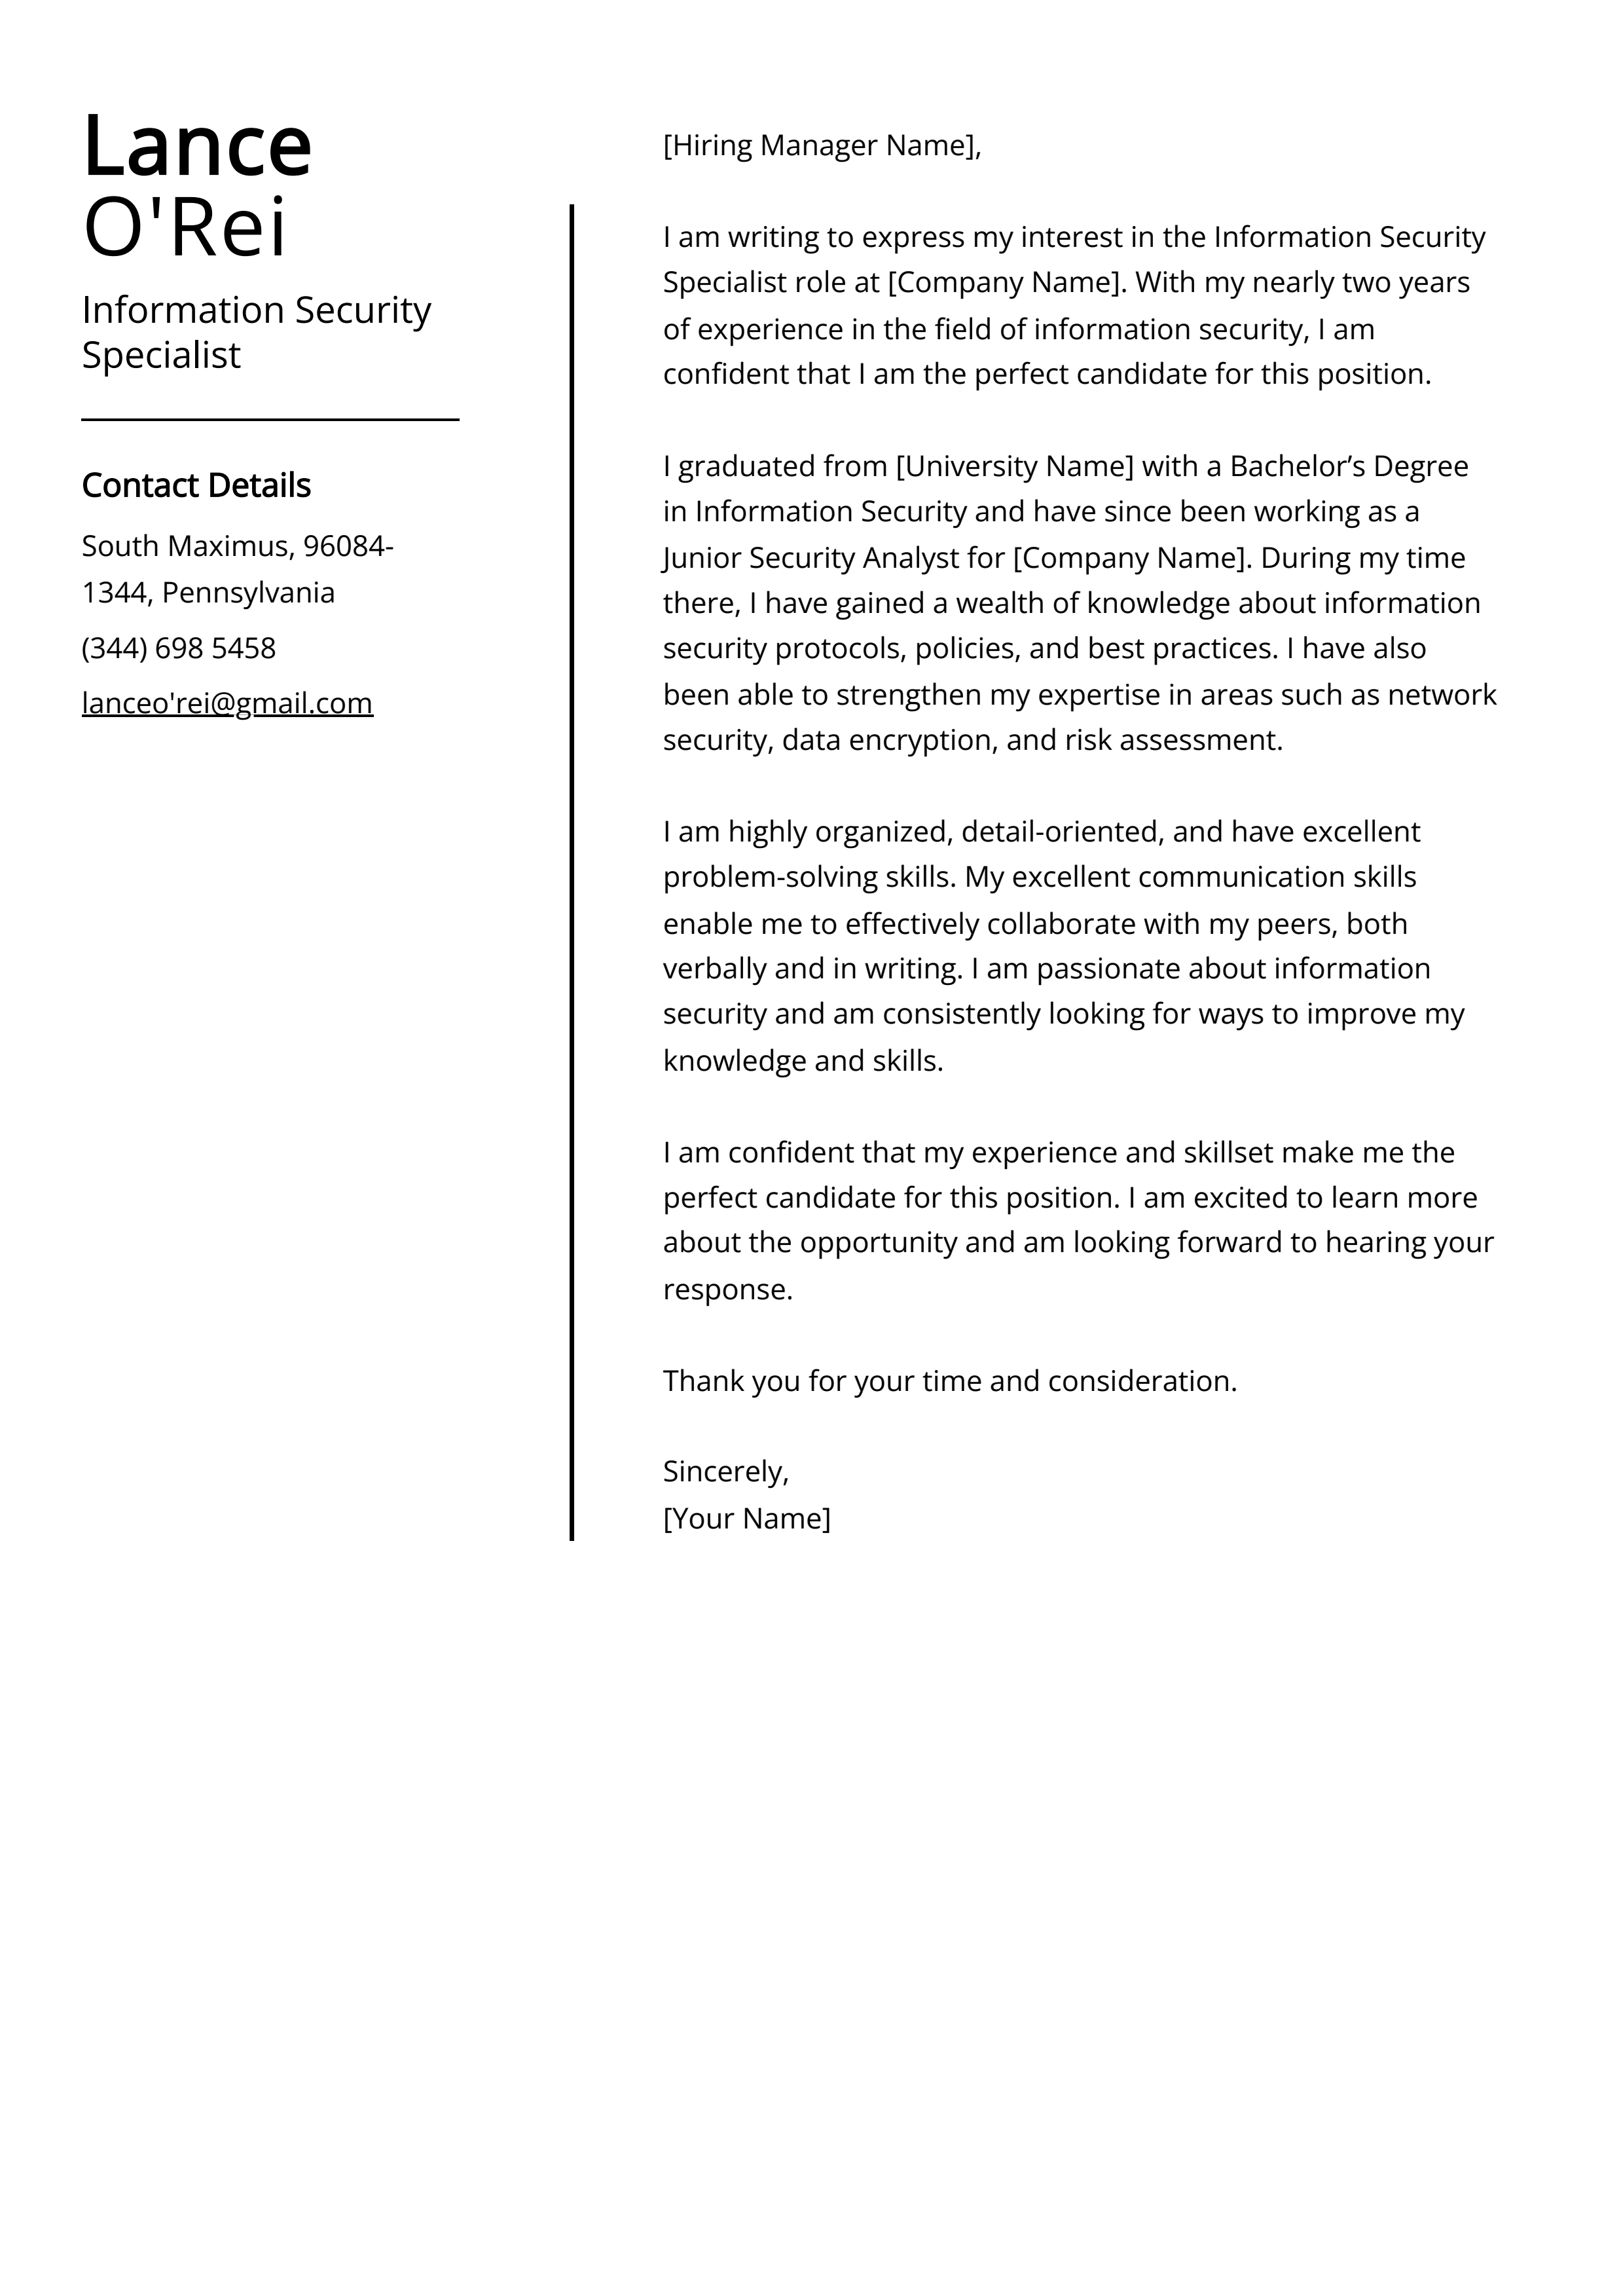 Information Security Specialist Cover Letter Example